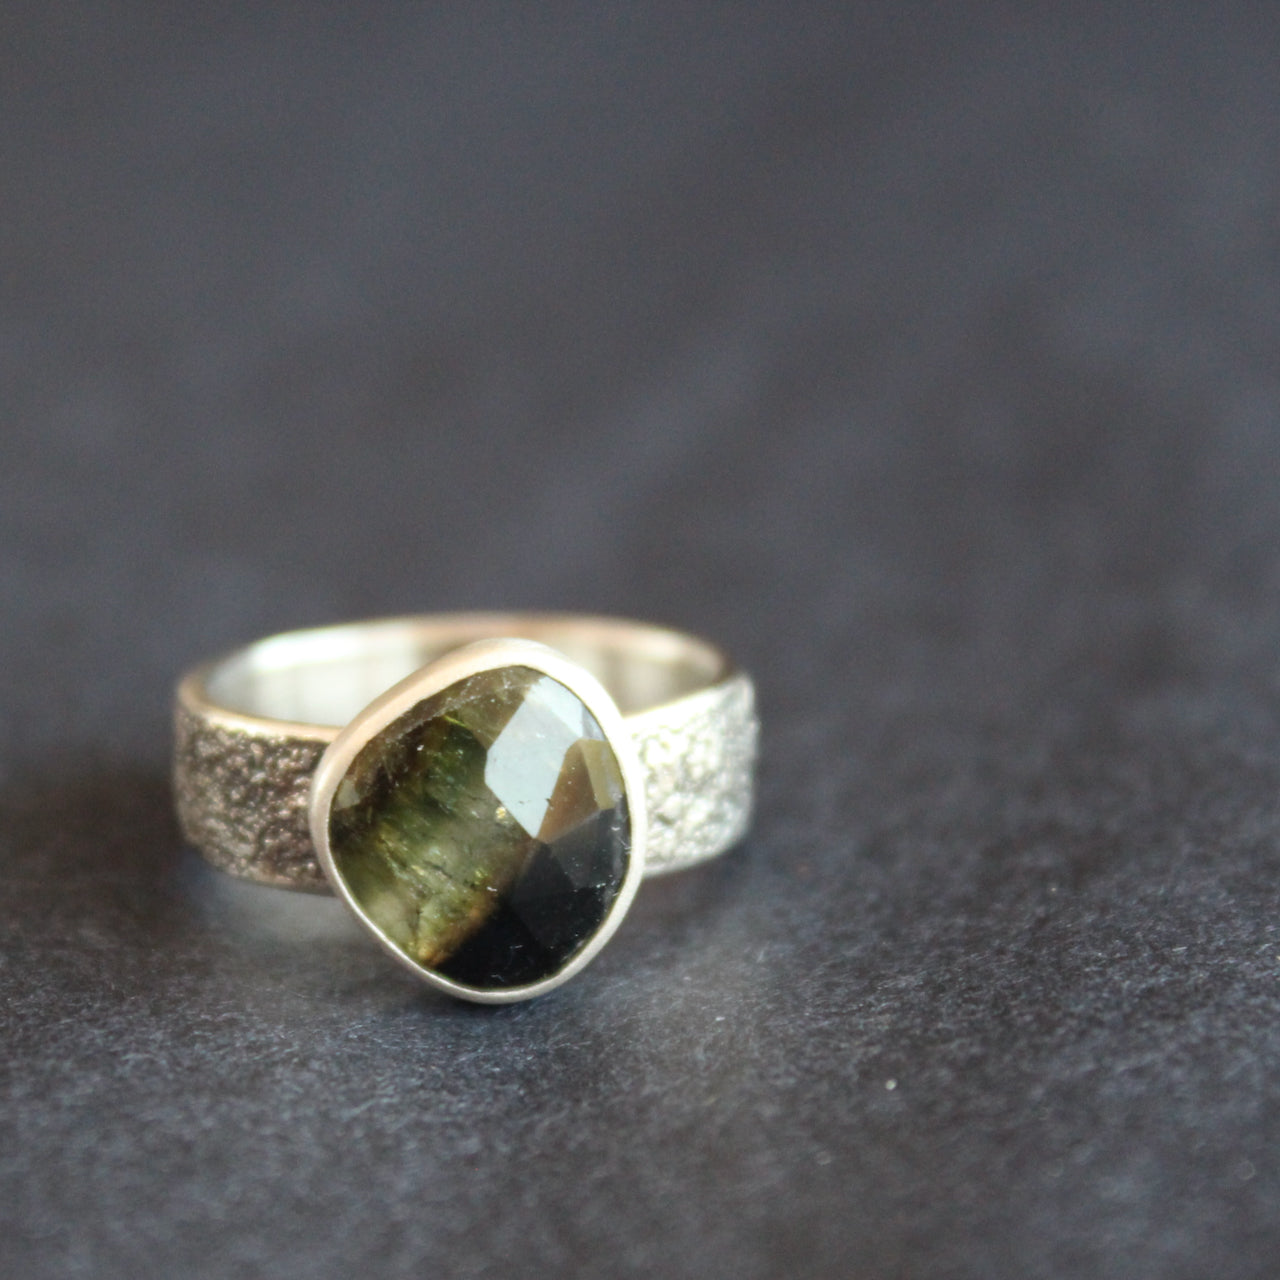 a textured silver ring with a dark green stone by UK jeweller Carin Lindberg 